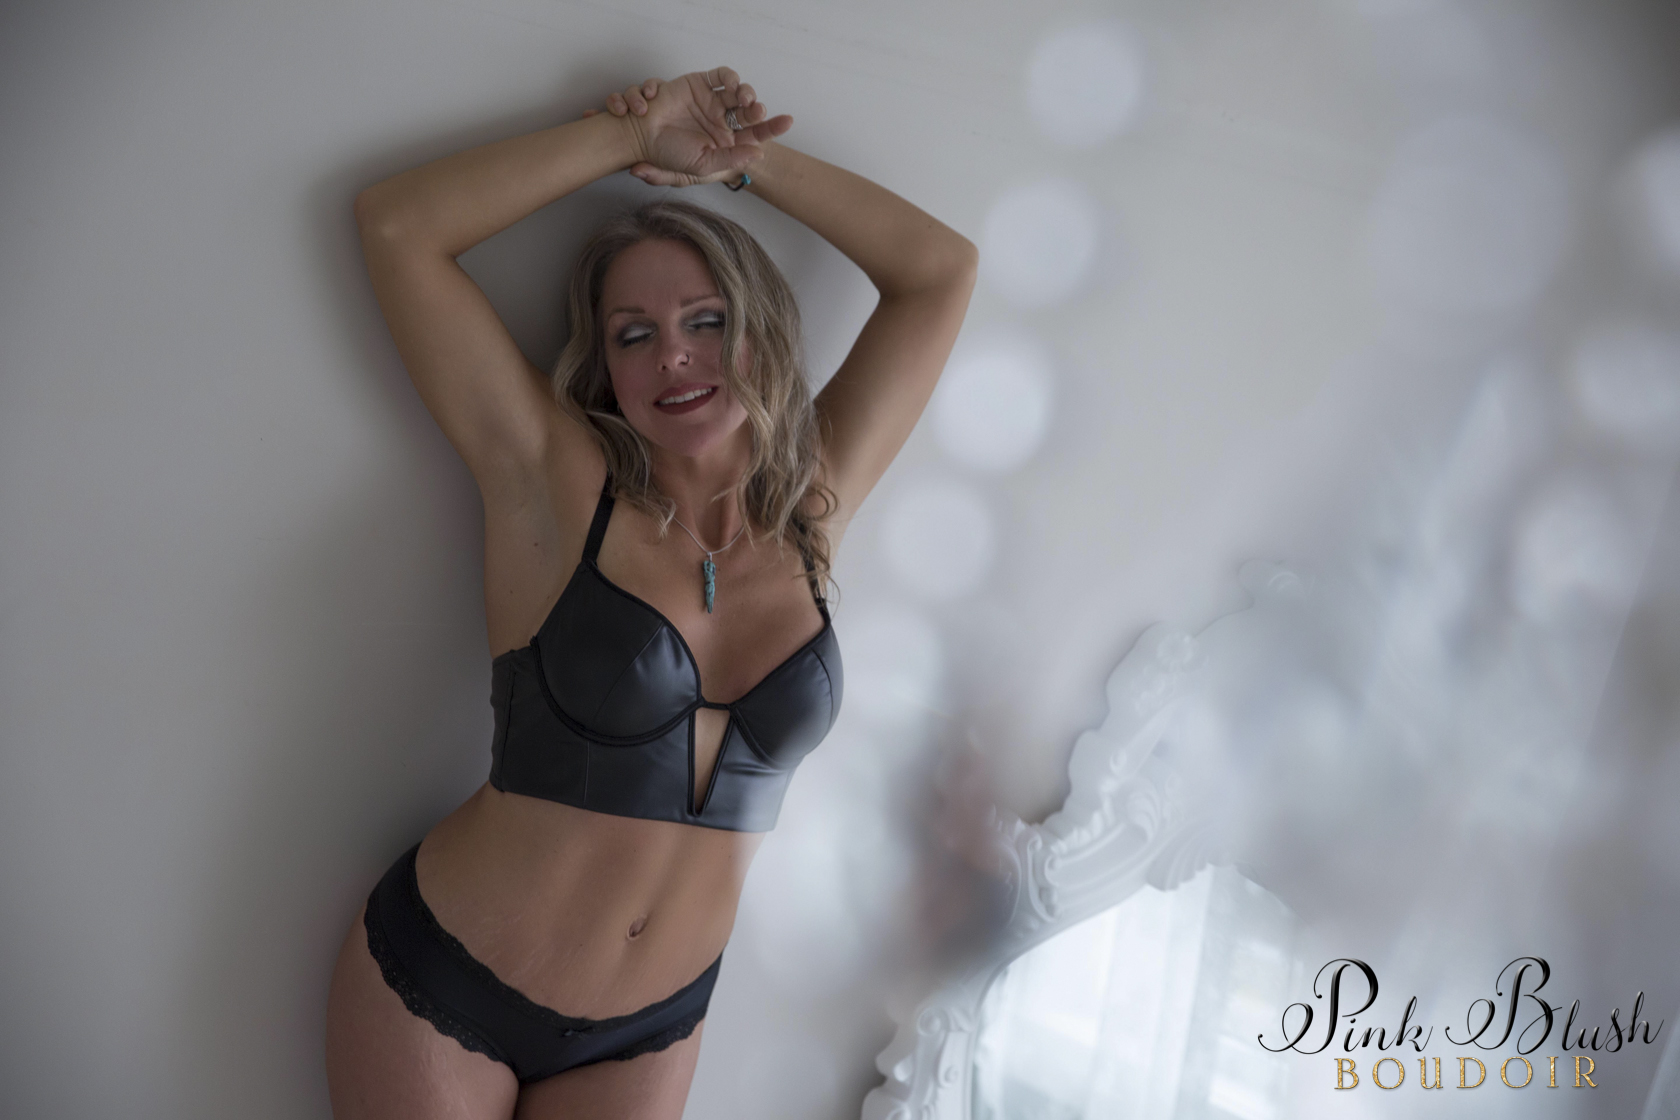 boudoir photos a woman in a black bra and panty set against a wall